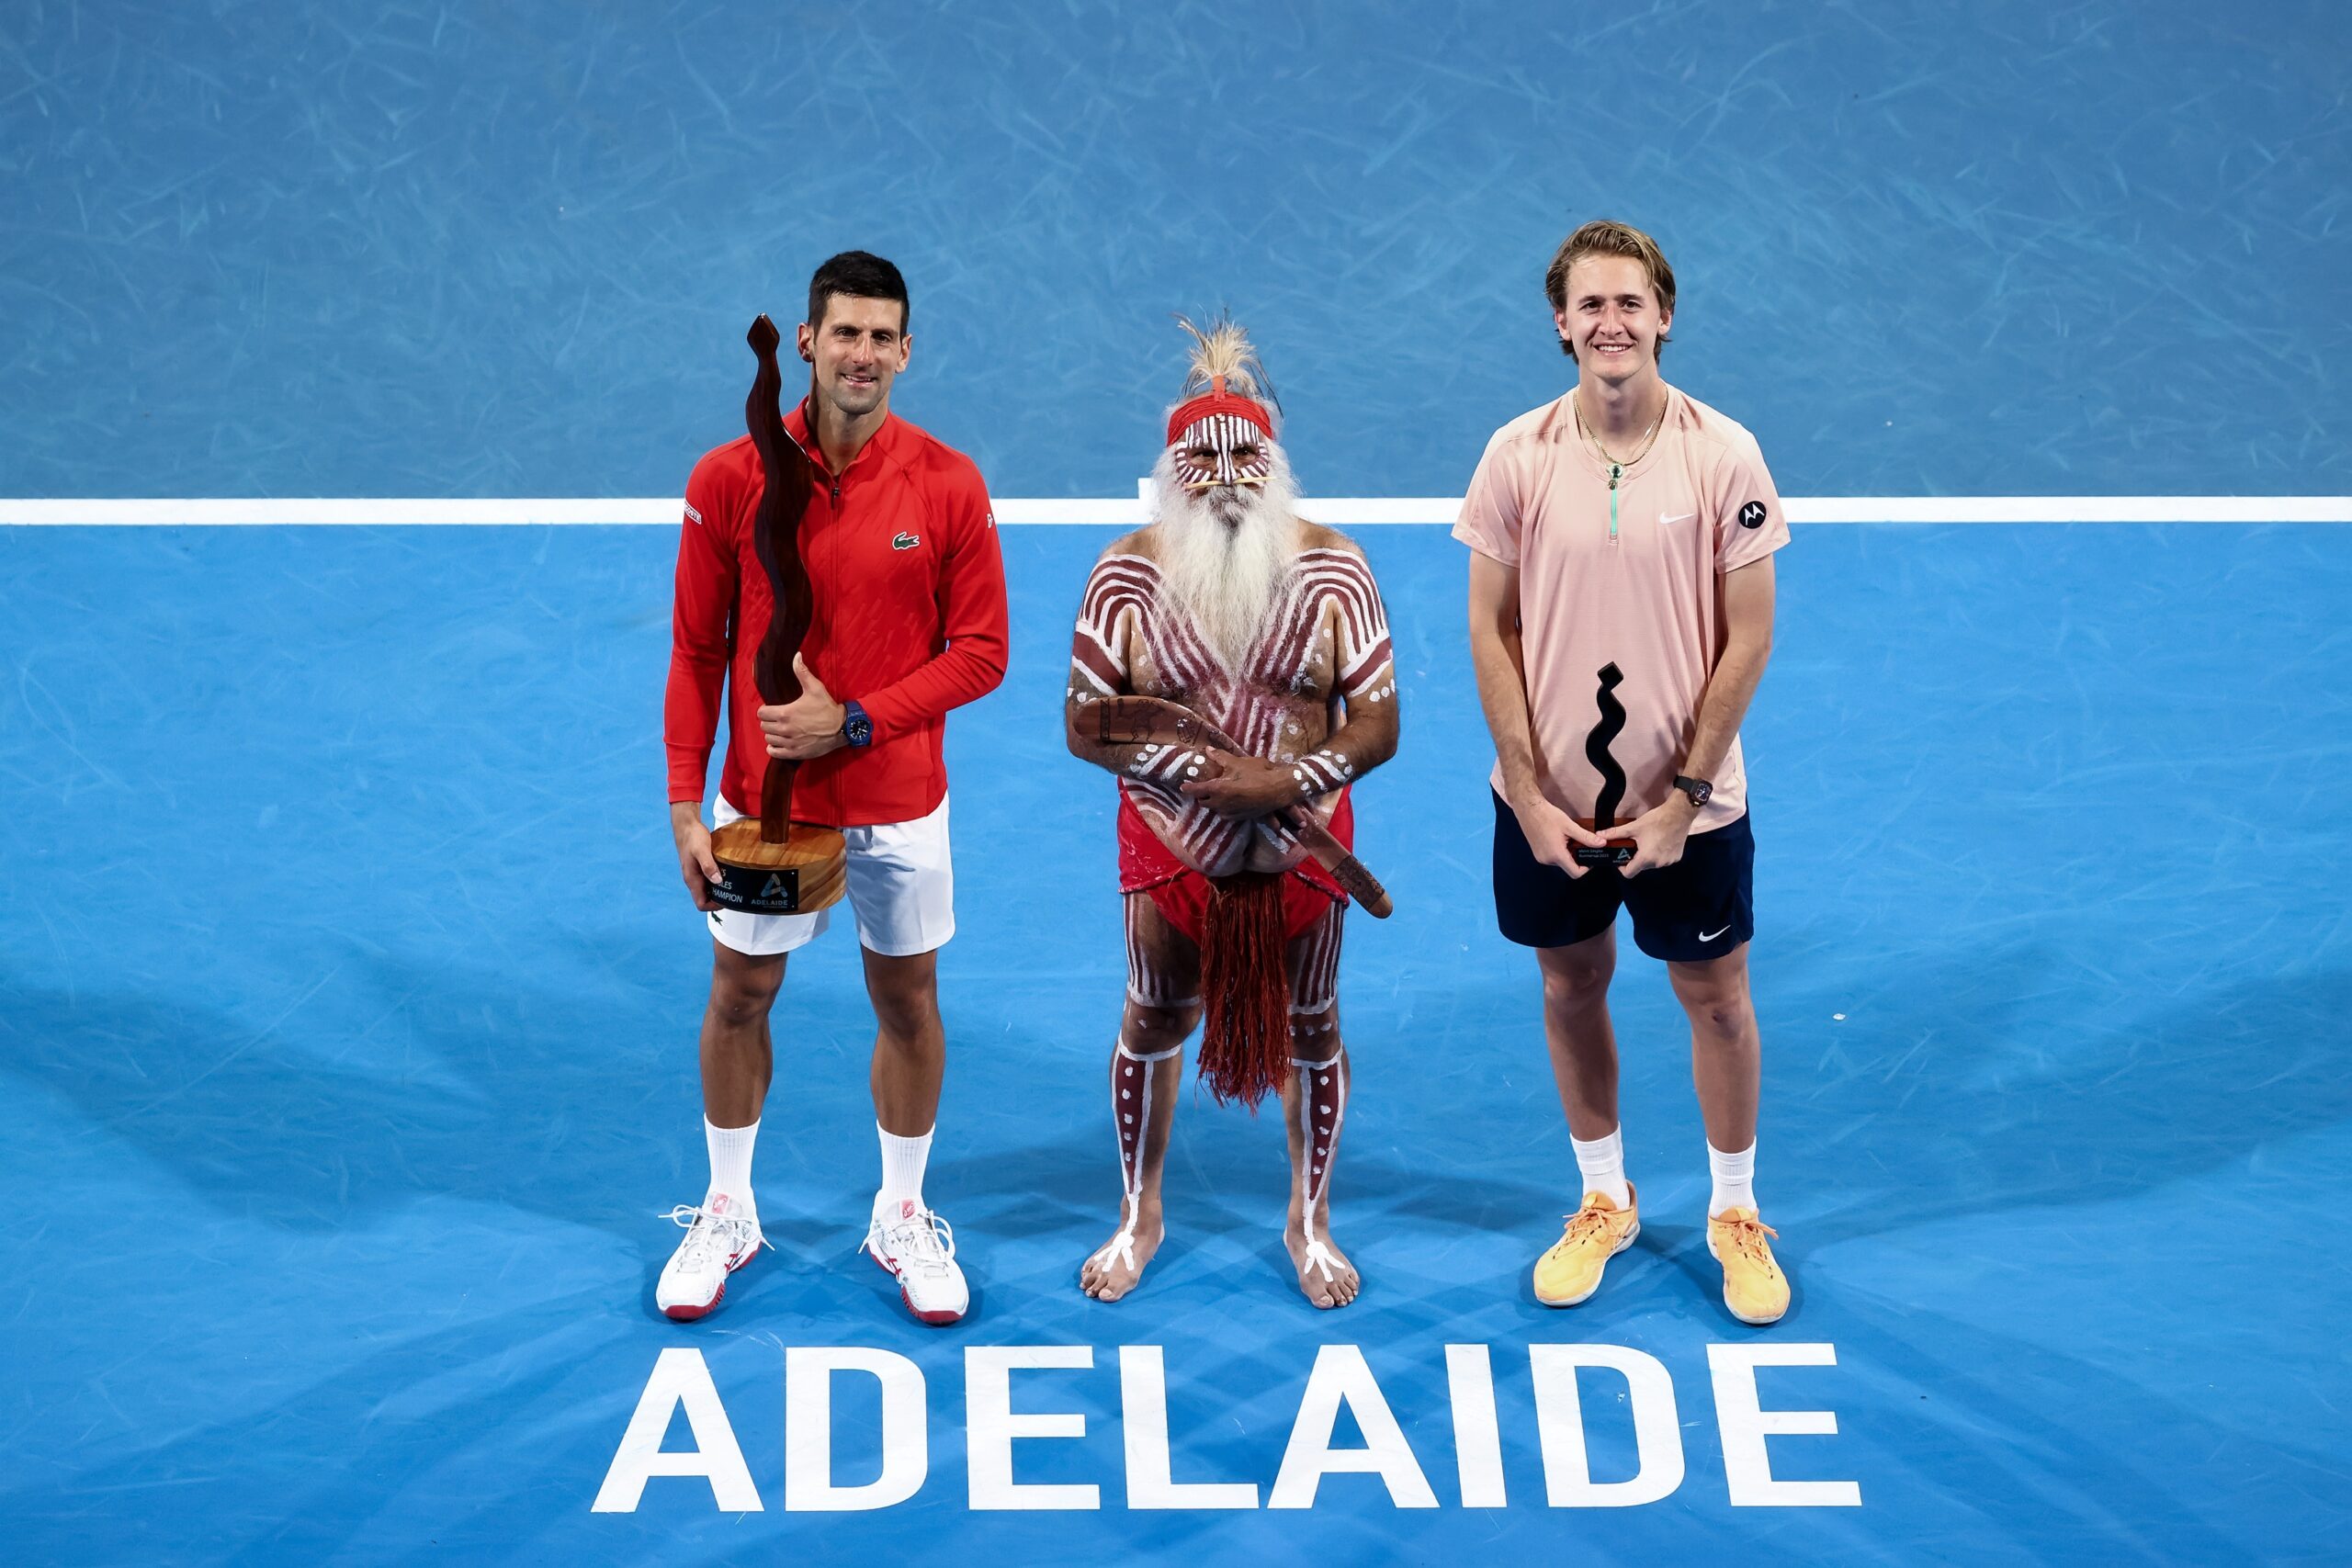 Nole begins the new season with a triumph in Adelaide!